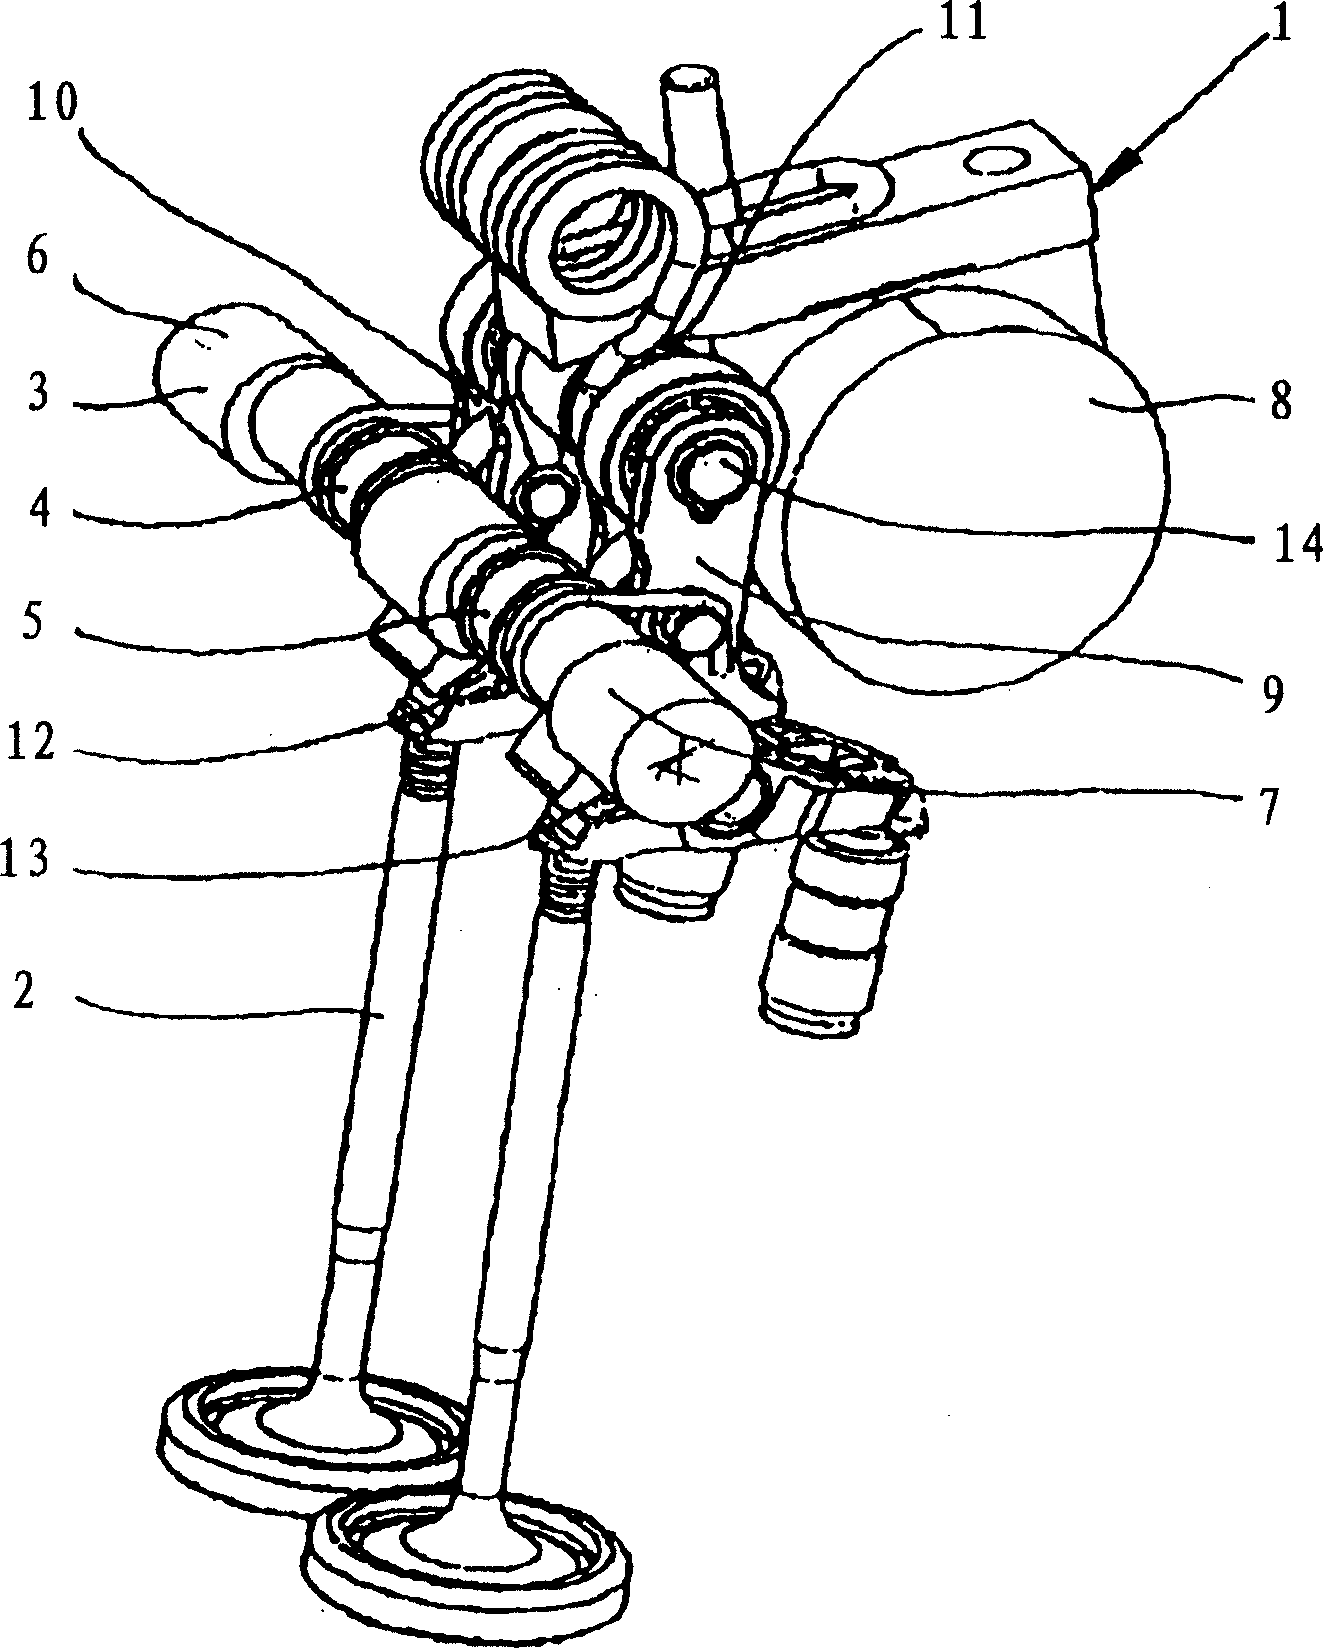 Variable valve lift control system for a combustion engine with underneath camshaft